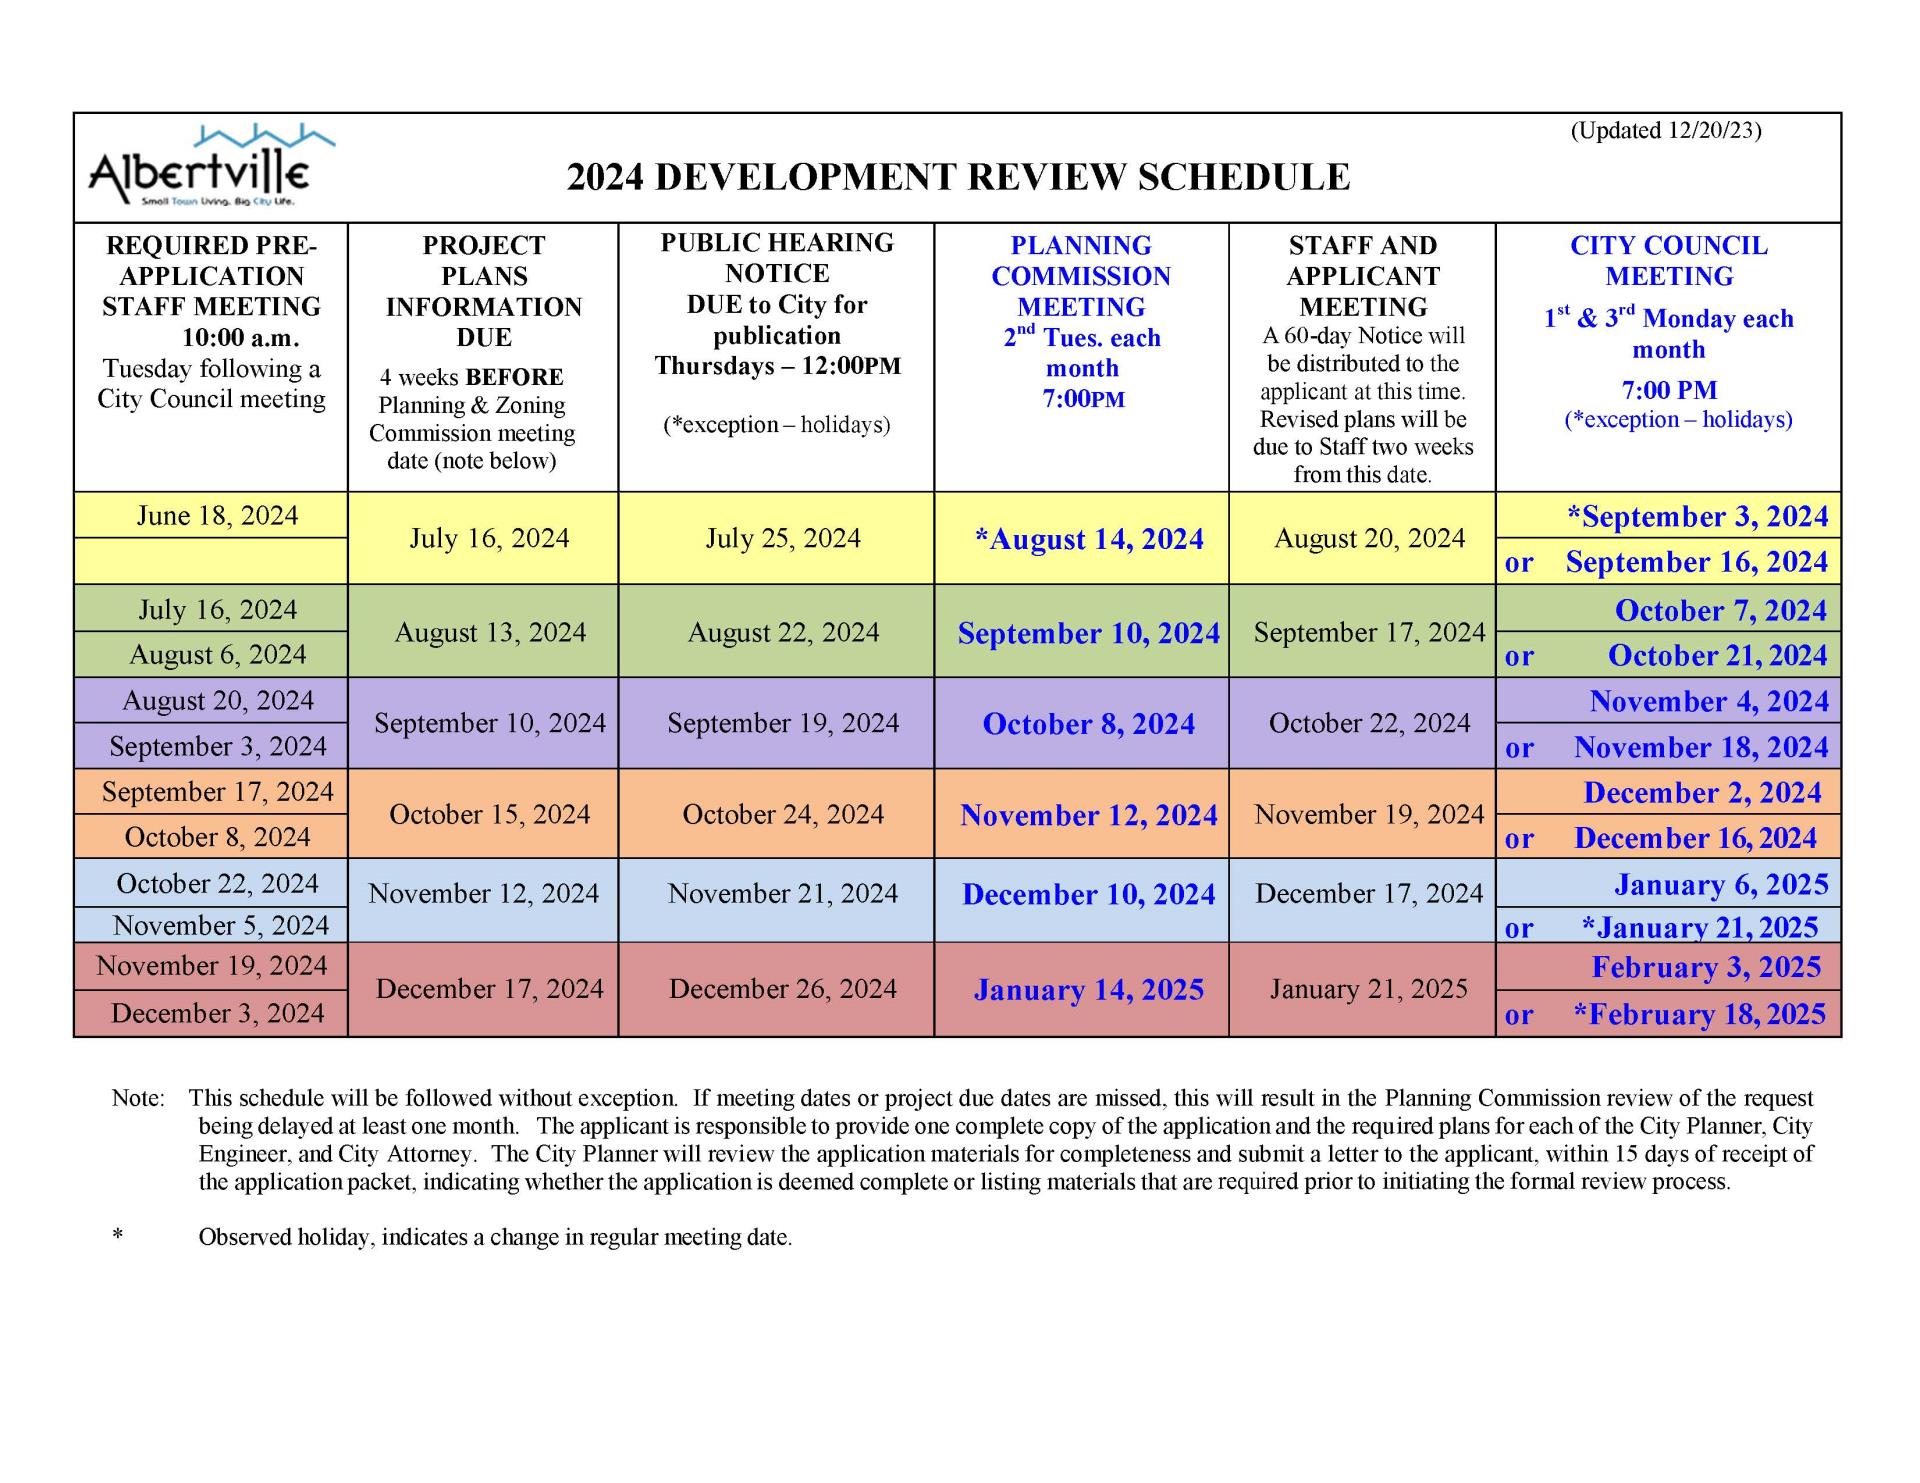 2024 Development Review Schedule 12-20-23_Page_2